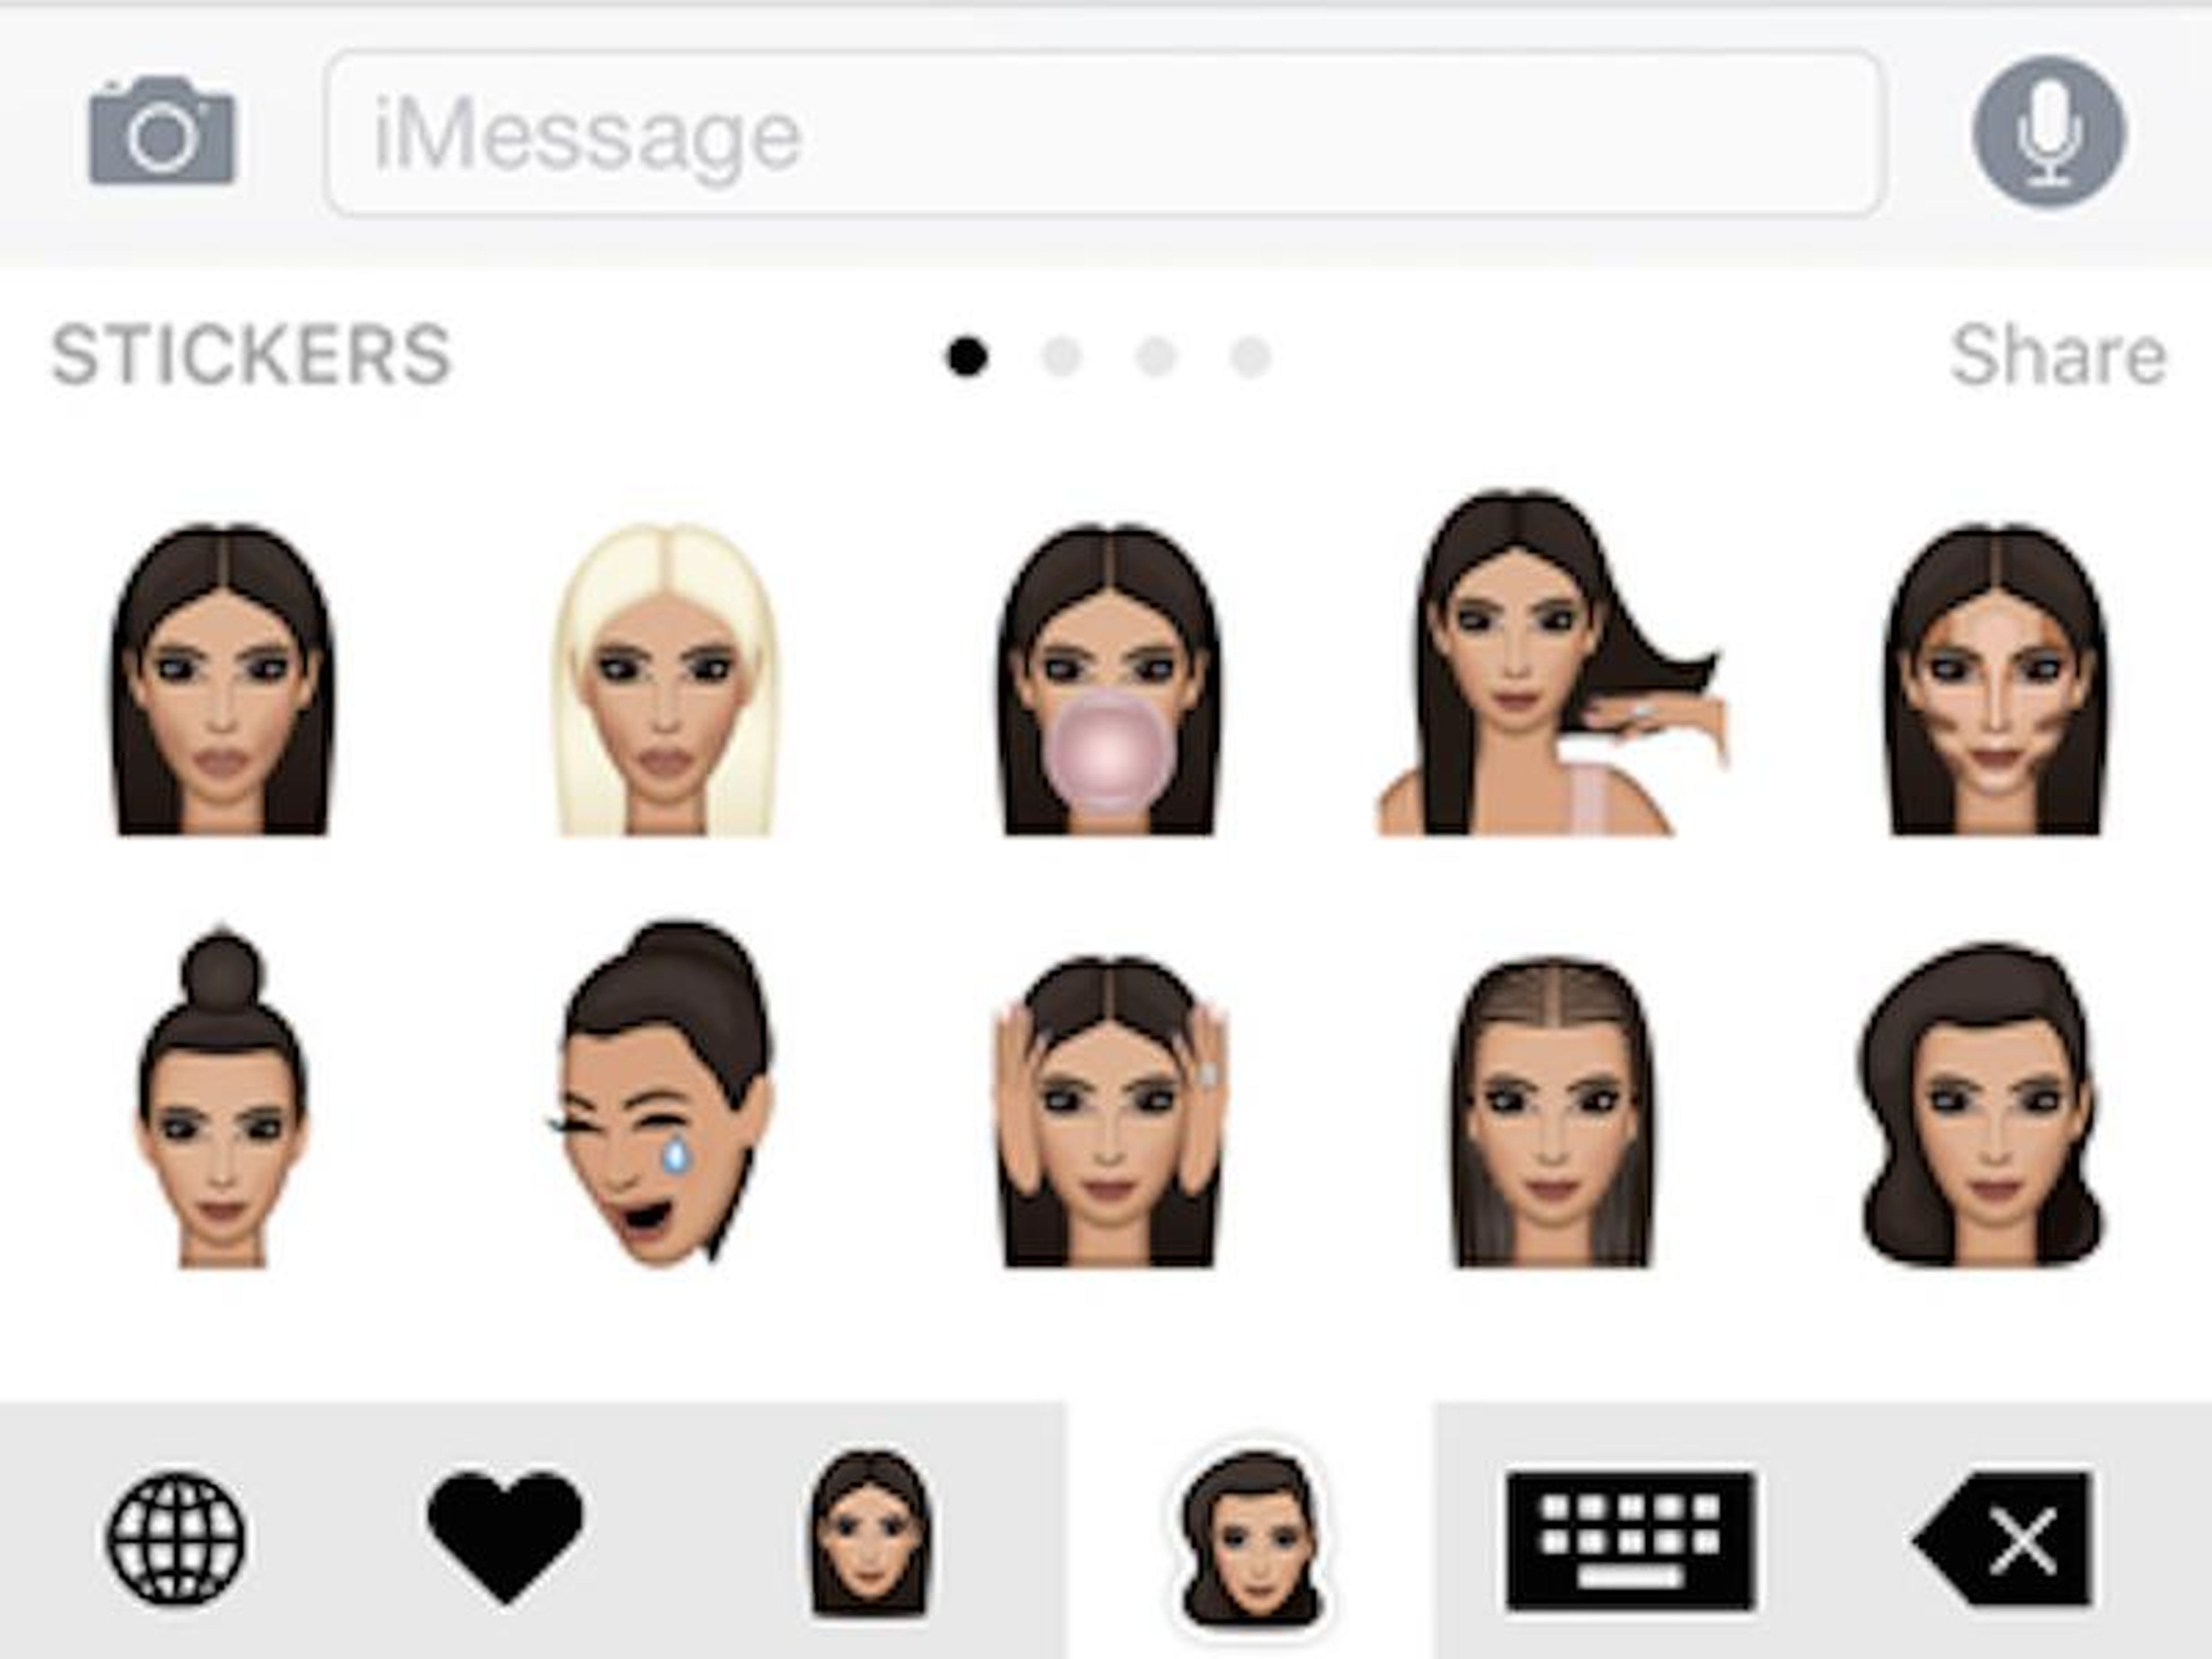 The launch of Kimojis for iOS in December 2015 was huge for Apple's App Store. She reportedly told Rolling Stone that she'd only work with Kanye-approved graphic designers to develop the emoji.